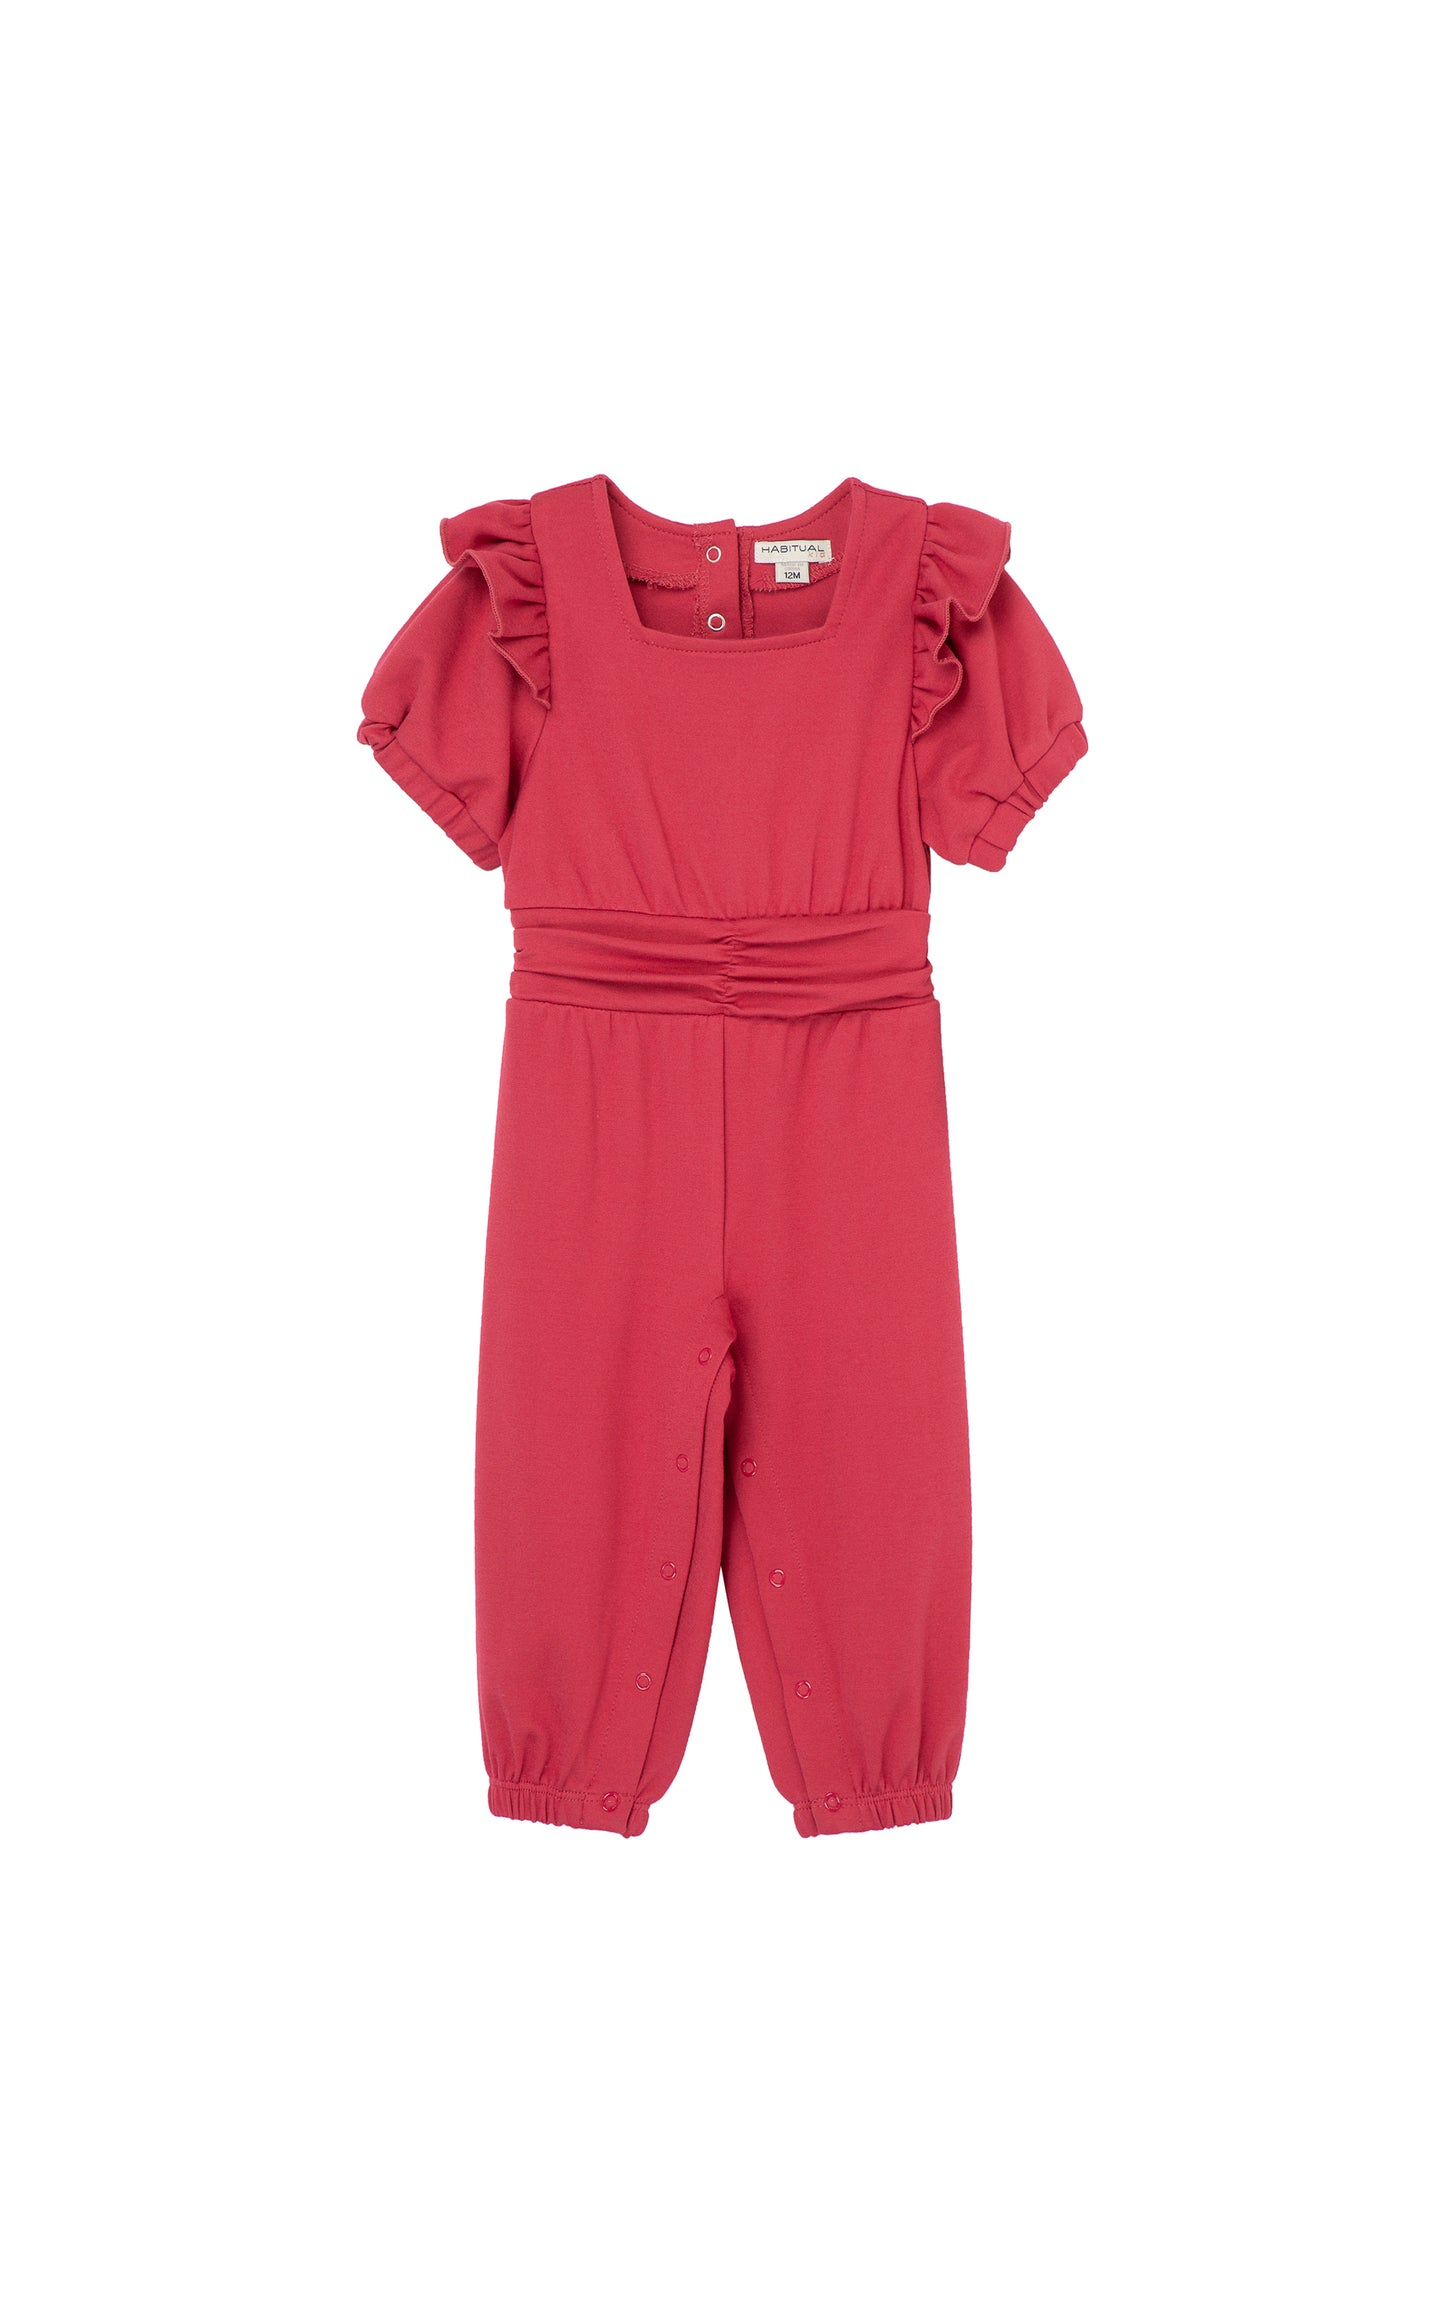 RED SQUARE NECK PONTE KNIT JUMPSUIT ONESIE  WITH GATHERING AT THE FRONT